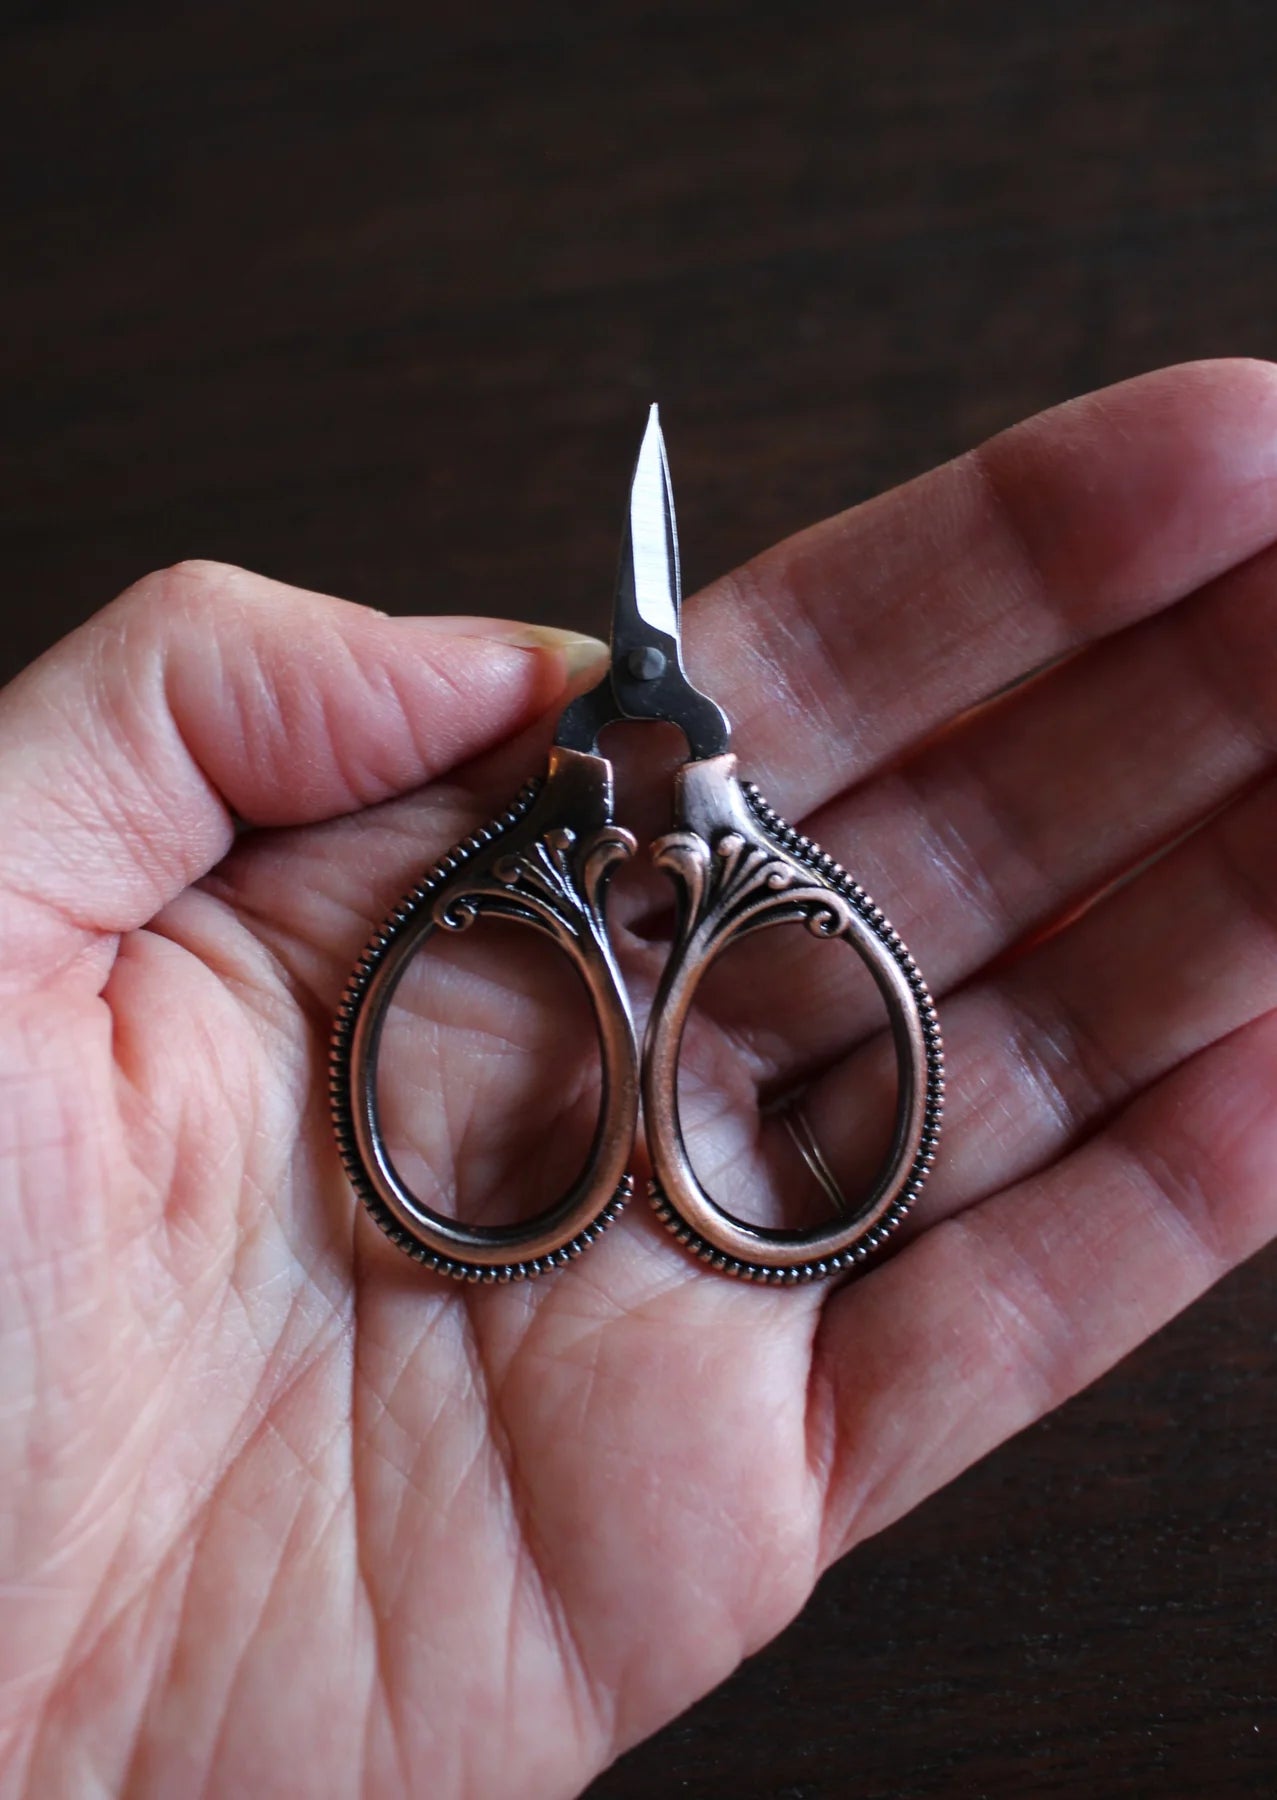 Embroidery Scissors Needlepoint Accessories 